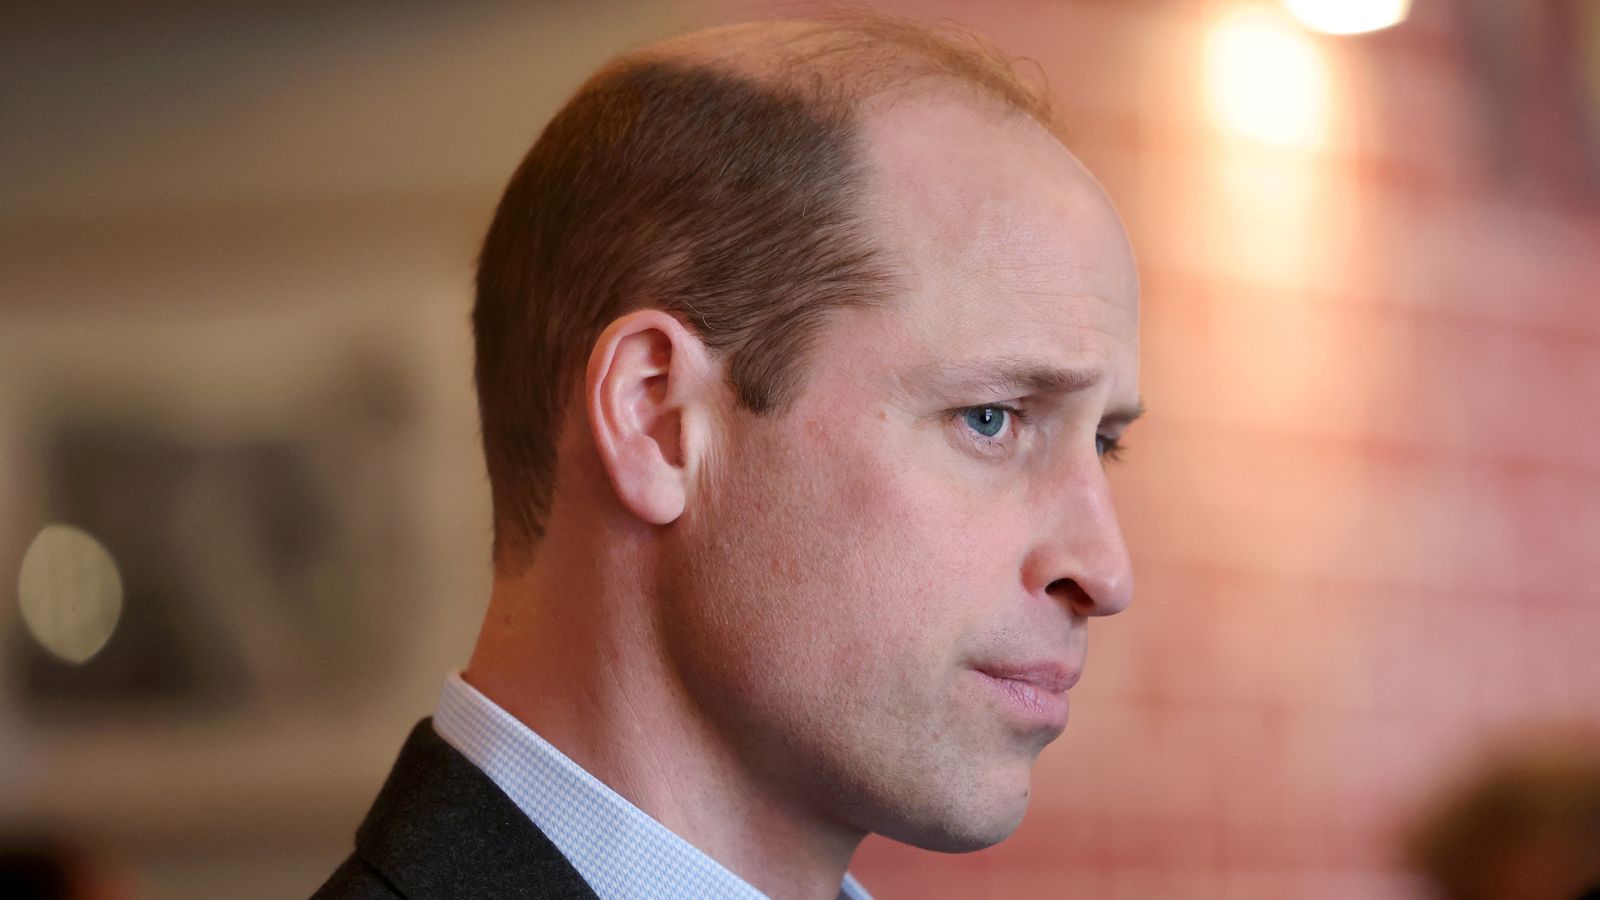 Prince William is likely being cautious about sharing what's going on in his personal life as he returns to public duties